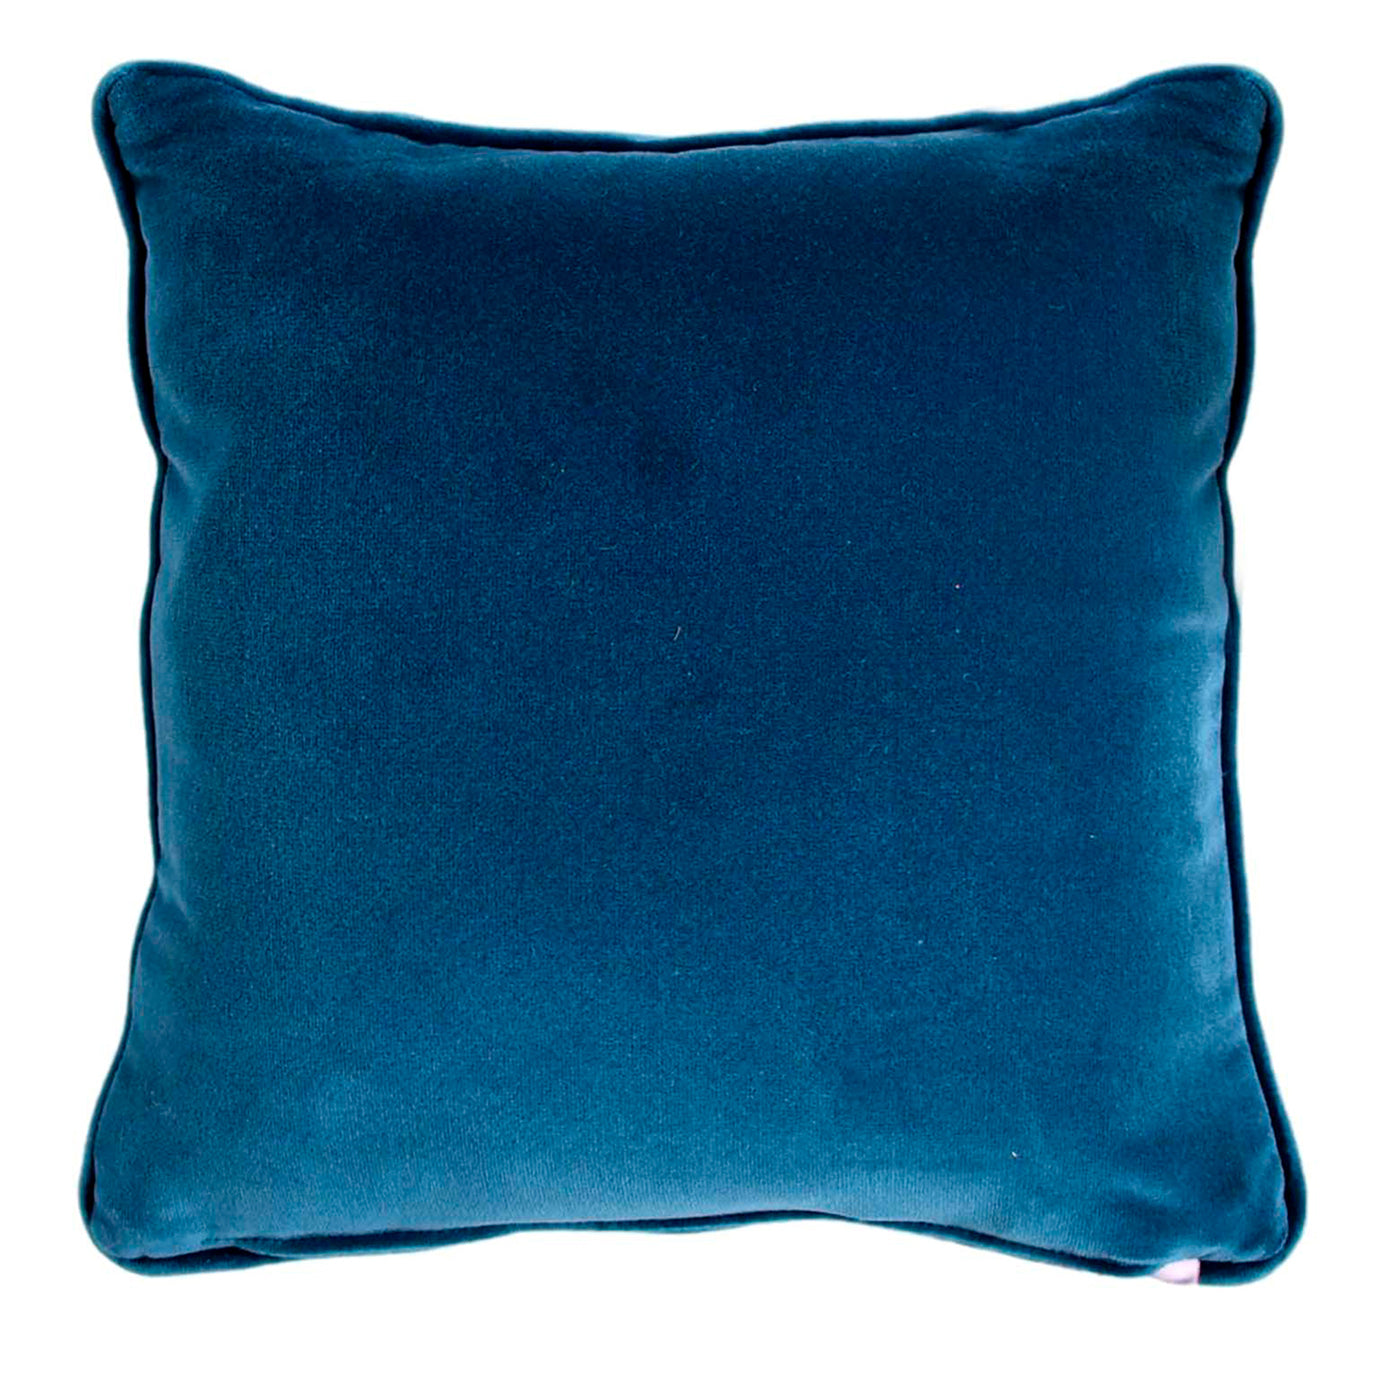 Turquoise and Blue Square Carrè Cushion - Alternative view 1